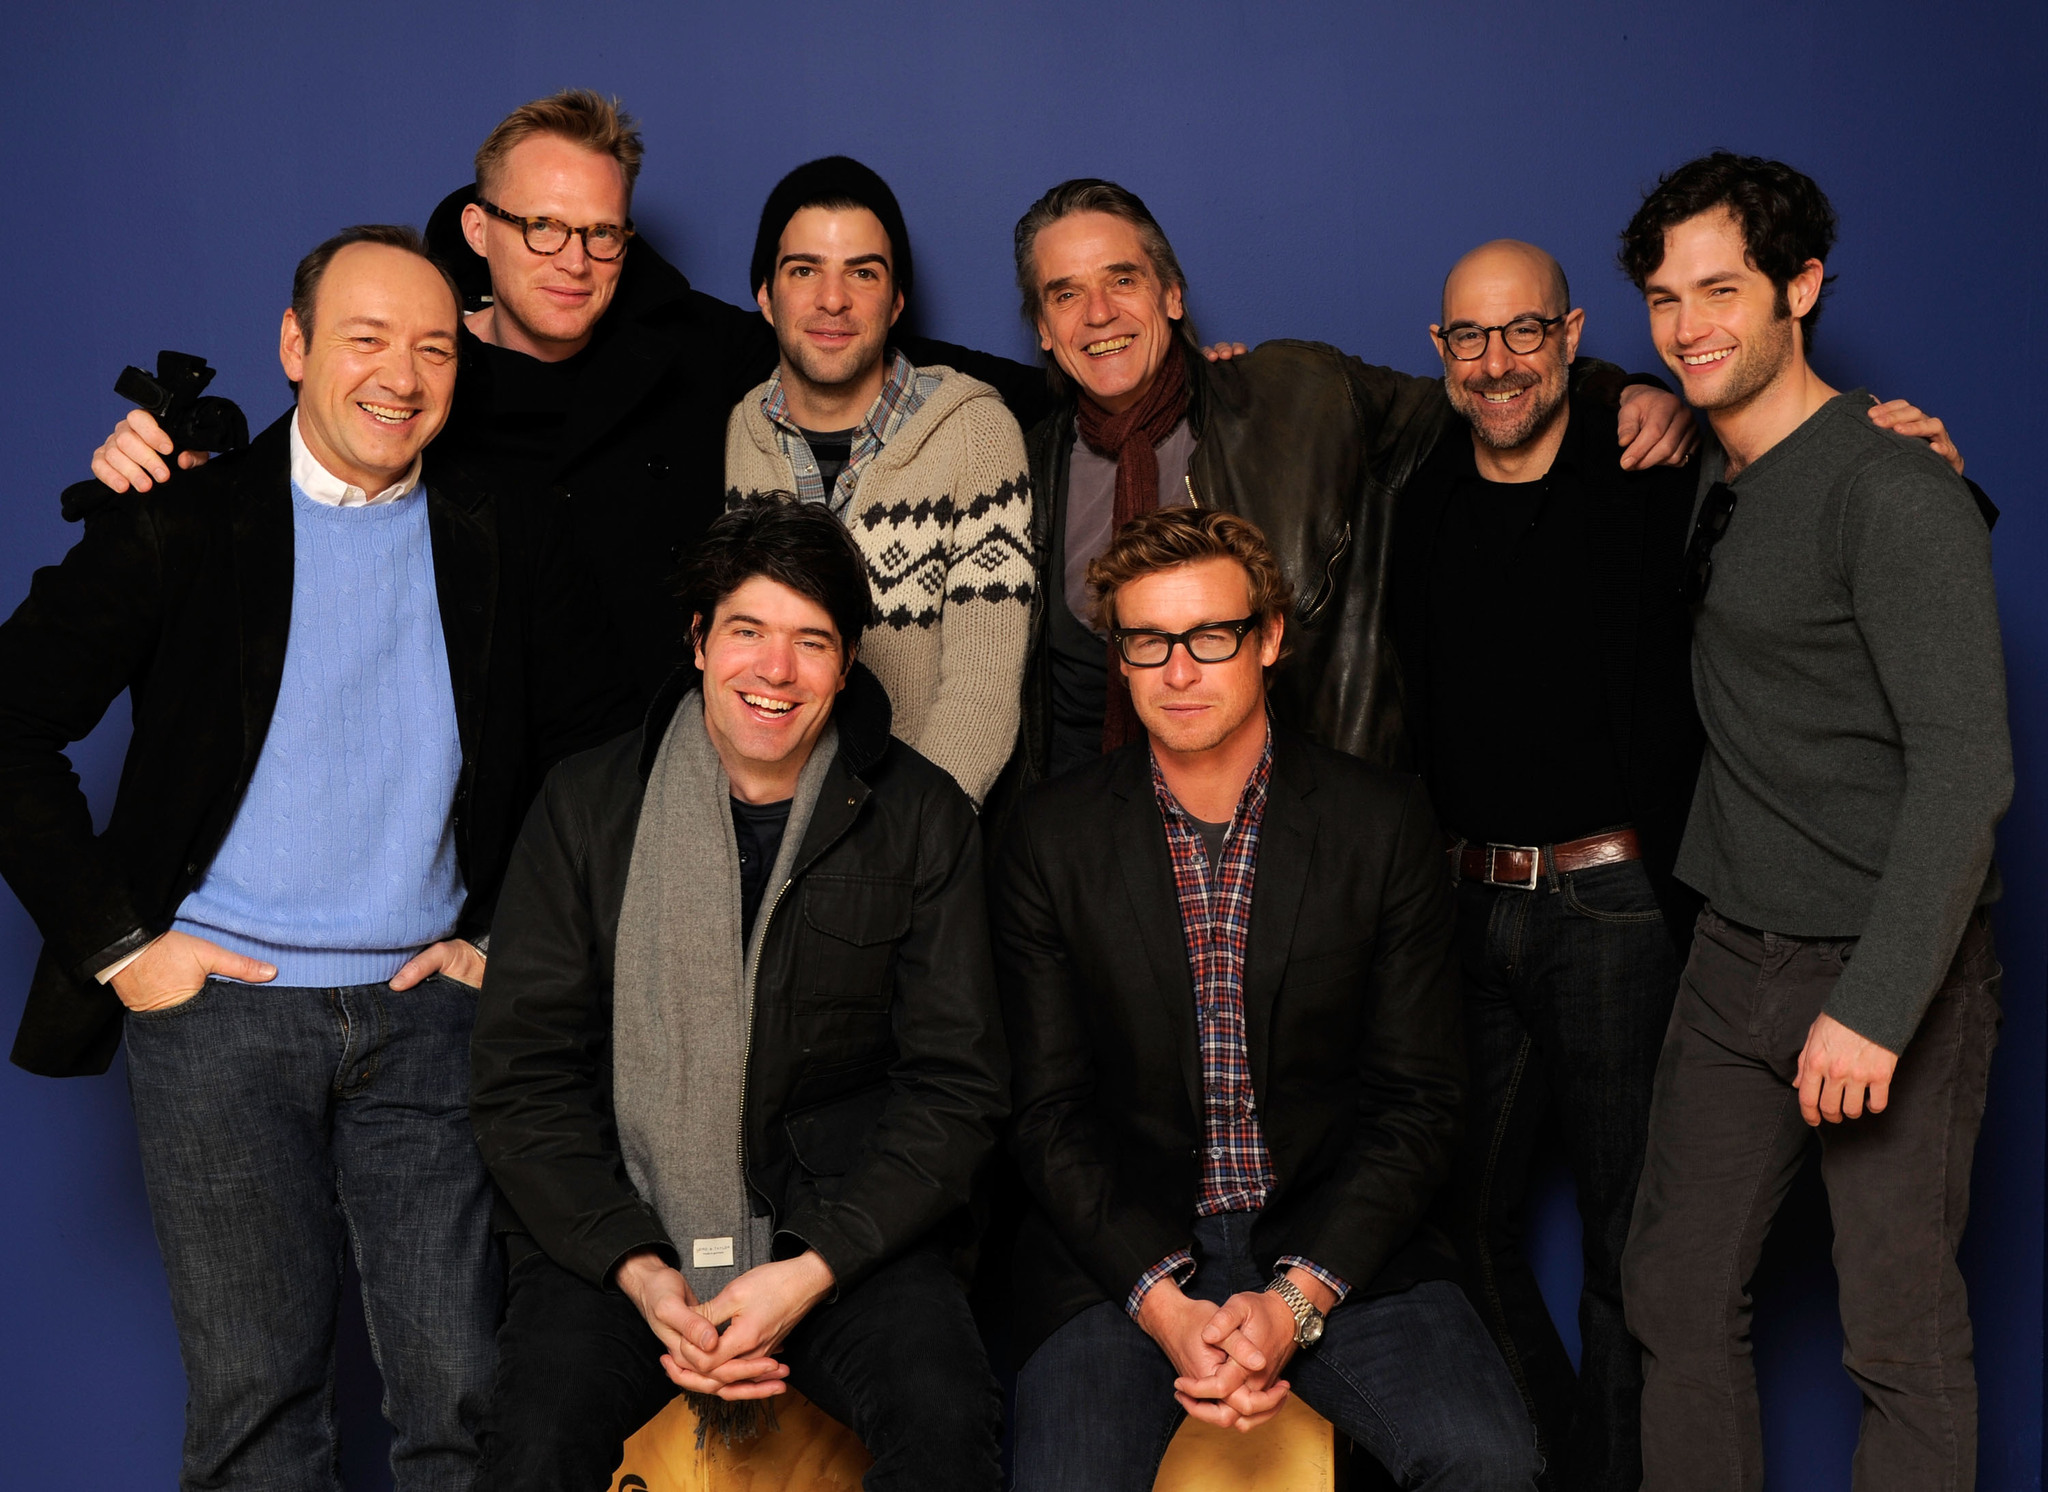 Kevin Spacey, Jeremy Irons, Stanley Tucci, Penn Badgley, Simon Baker, Paul Bettany, Zachary Quinto and J.C. Chandor